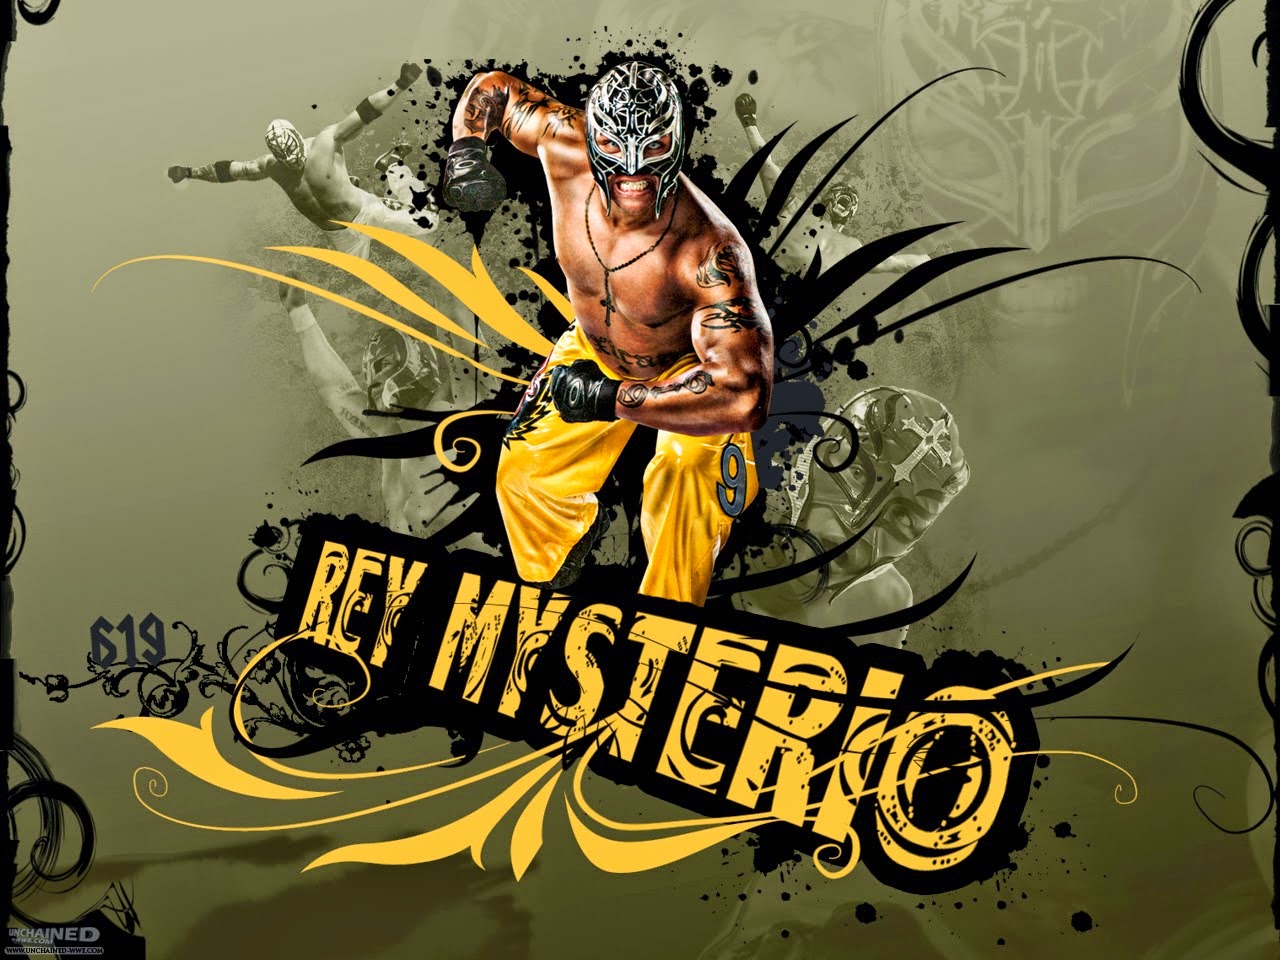 Rey Mysterio 619 New HD Wallpapers - Wrestling Wallpapers